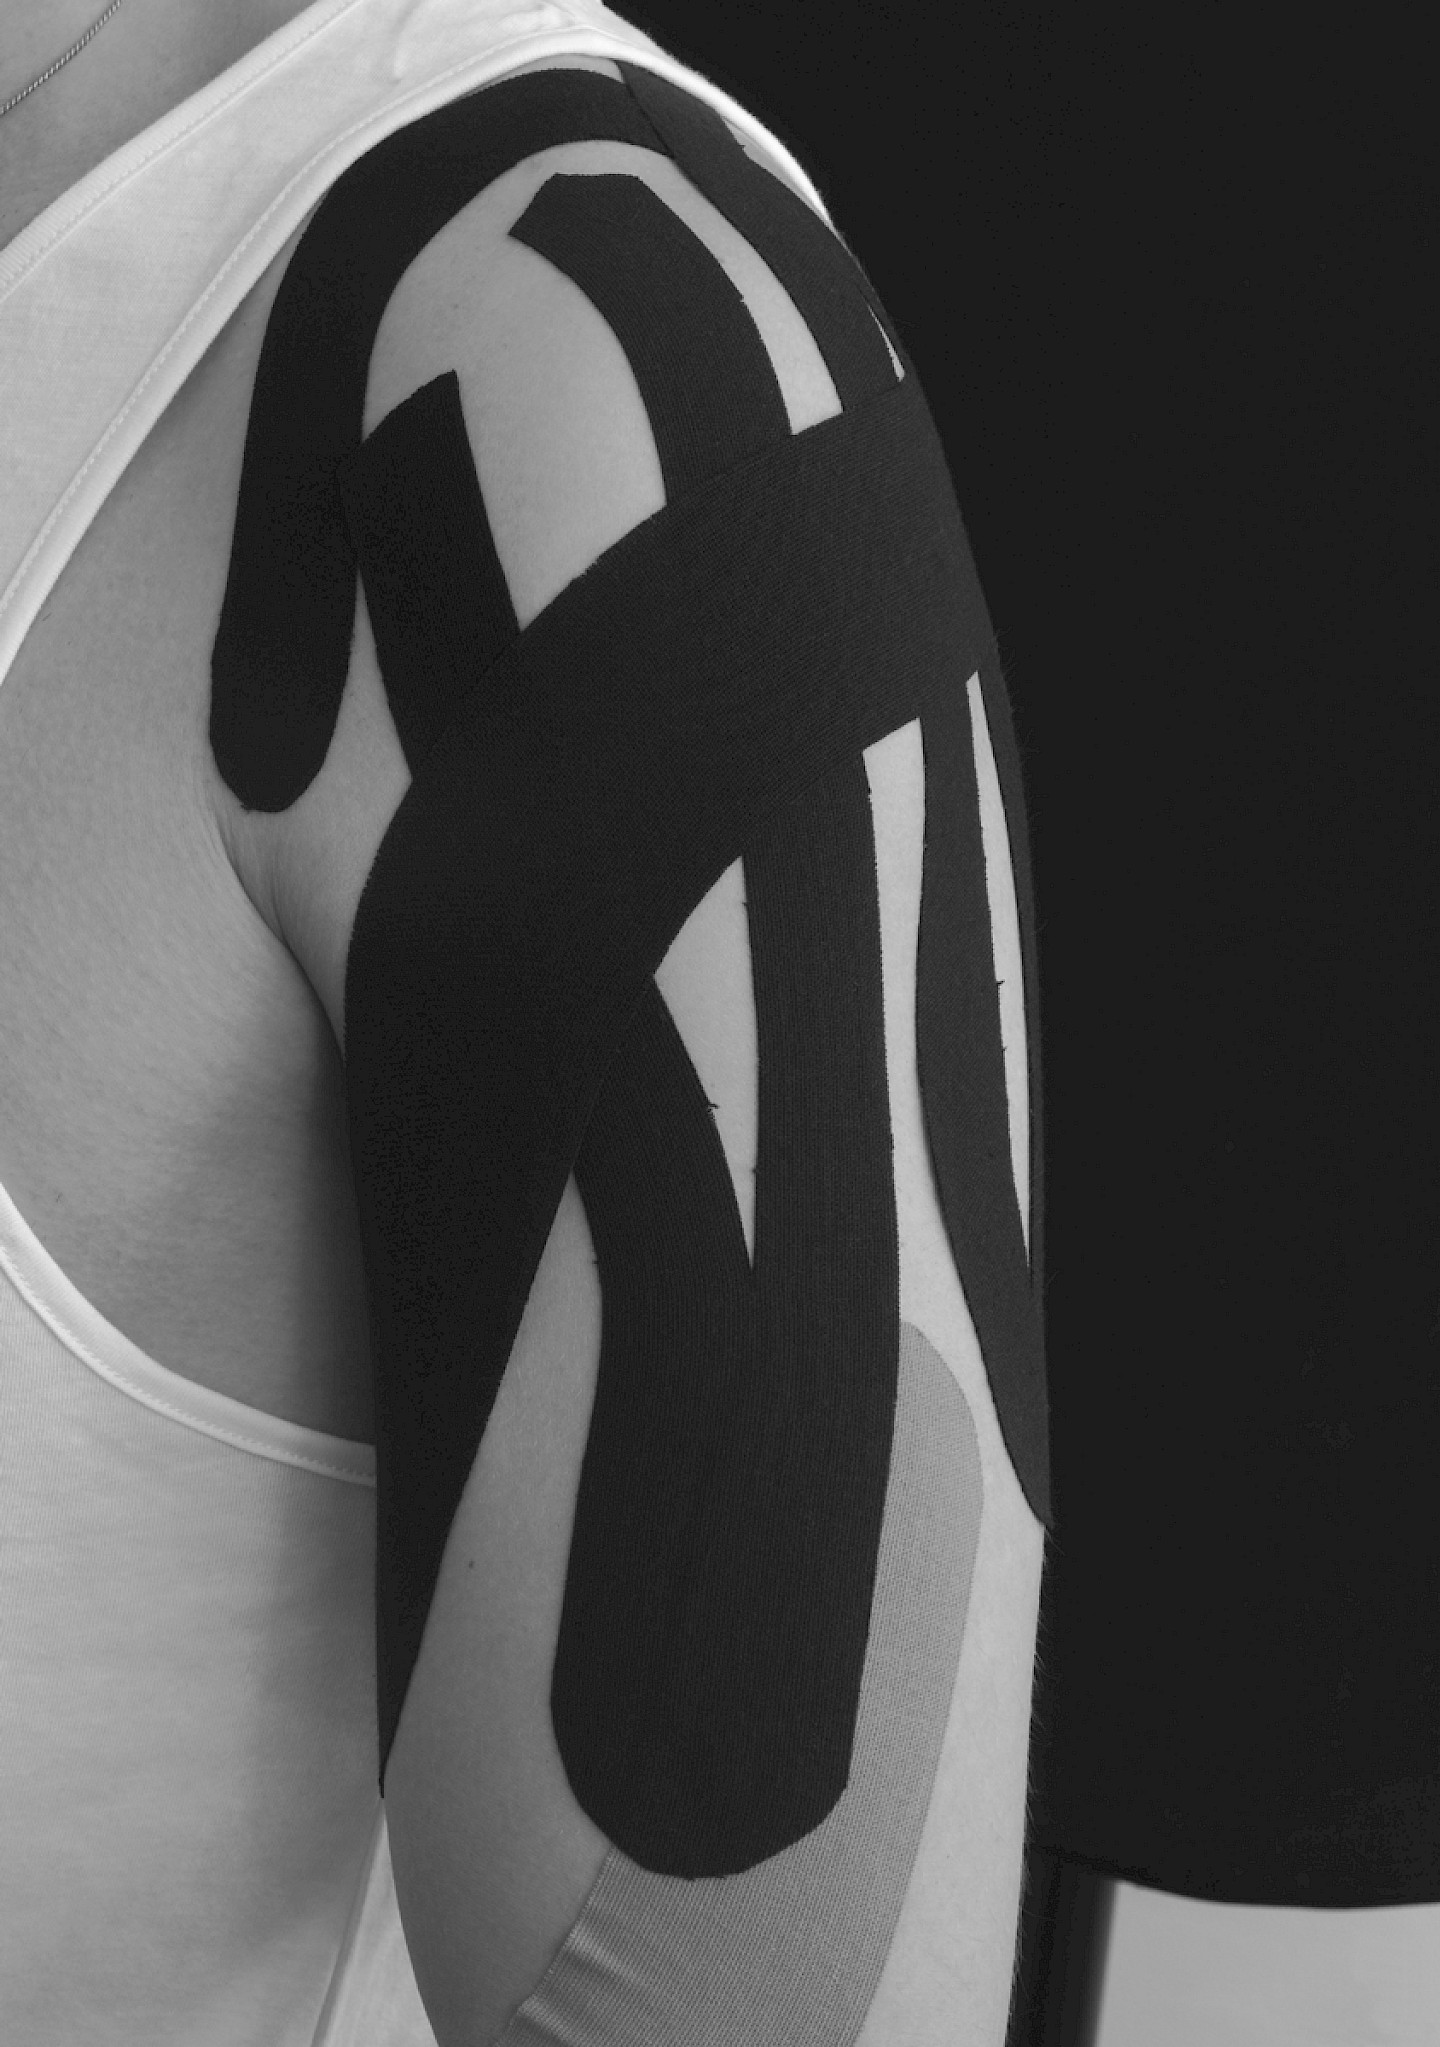 Arm and Tape, Inkjetprint, 2015 © Marie-Luise Marchand